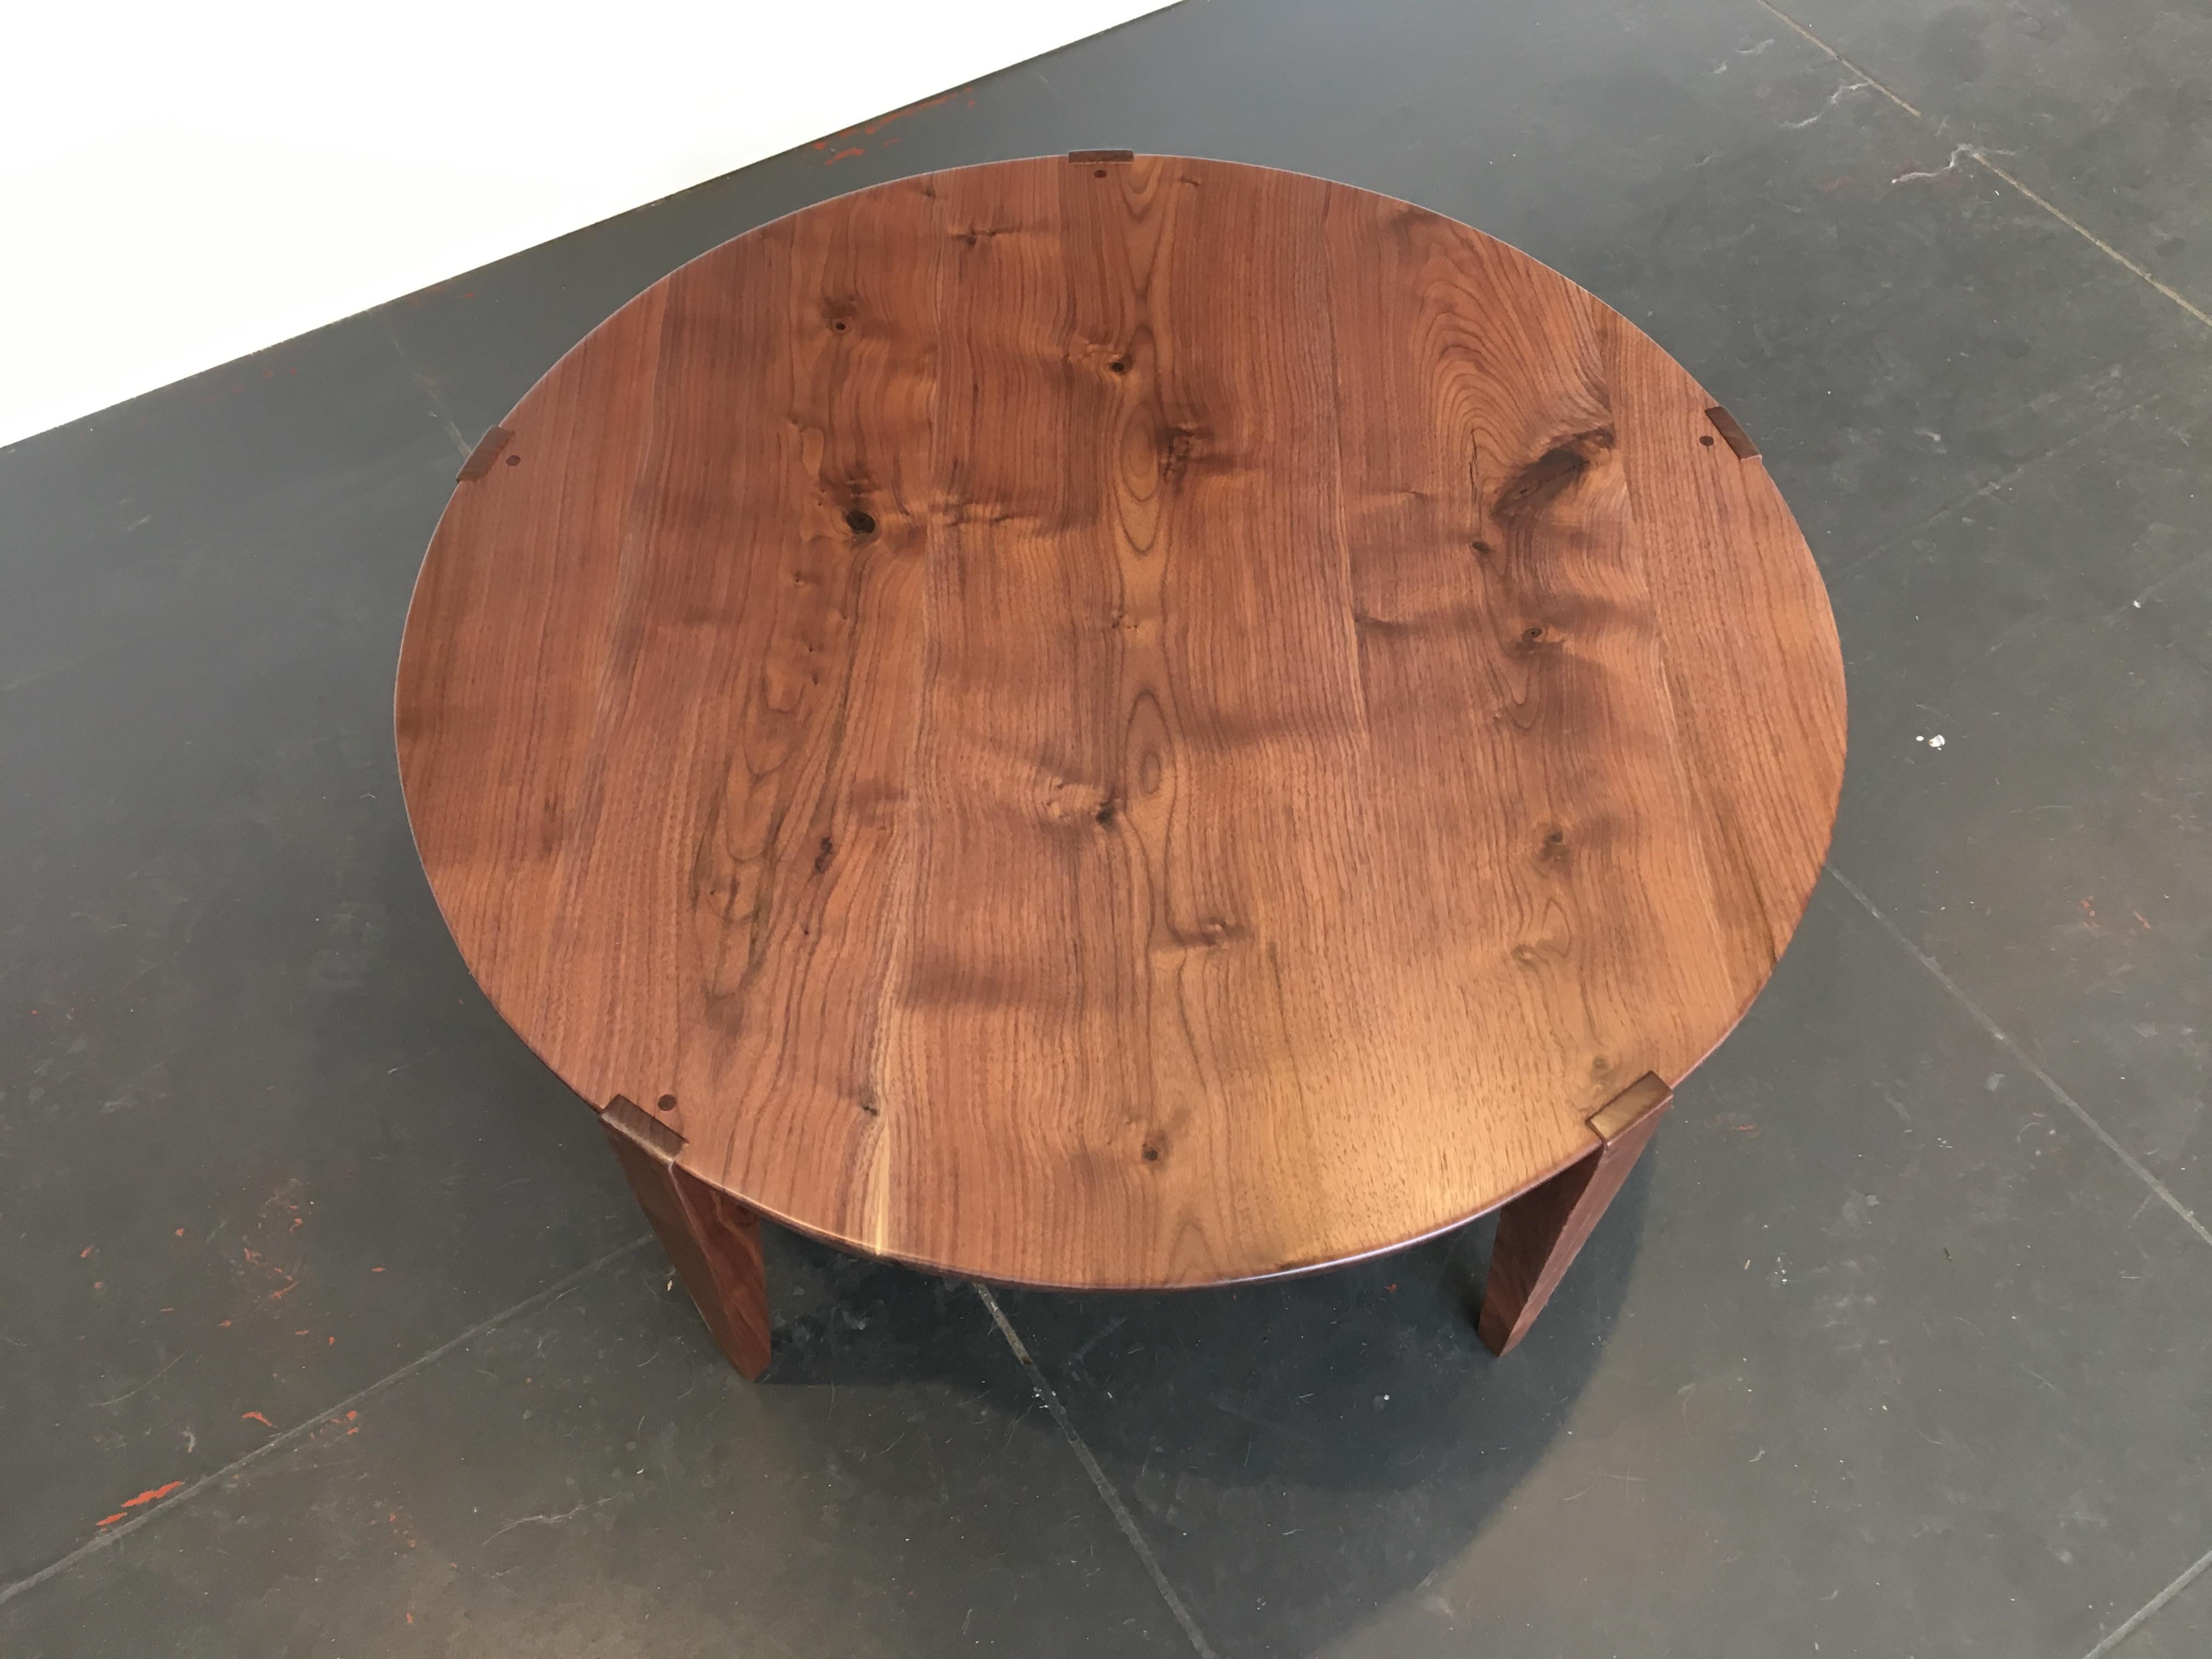 Simplicity and function converge in the Oslo round coffee table. This essential addition to your living room or lobby will keep foot traffic flowing more smoothly. Featuring our signature beveled edge tabletop, notched joinery, and finished with our